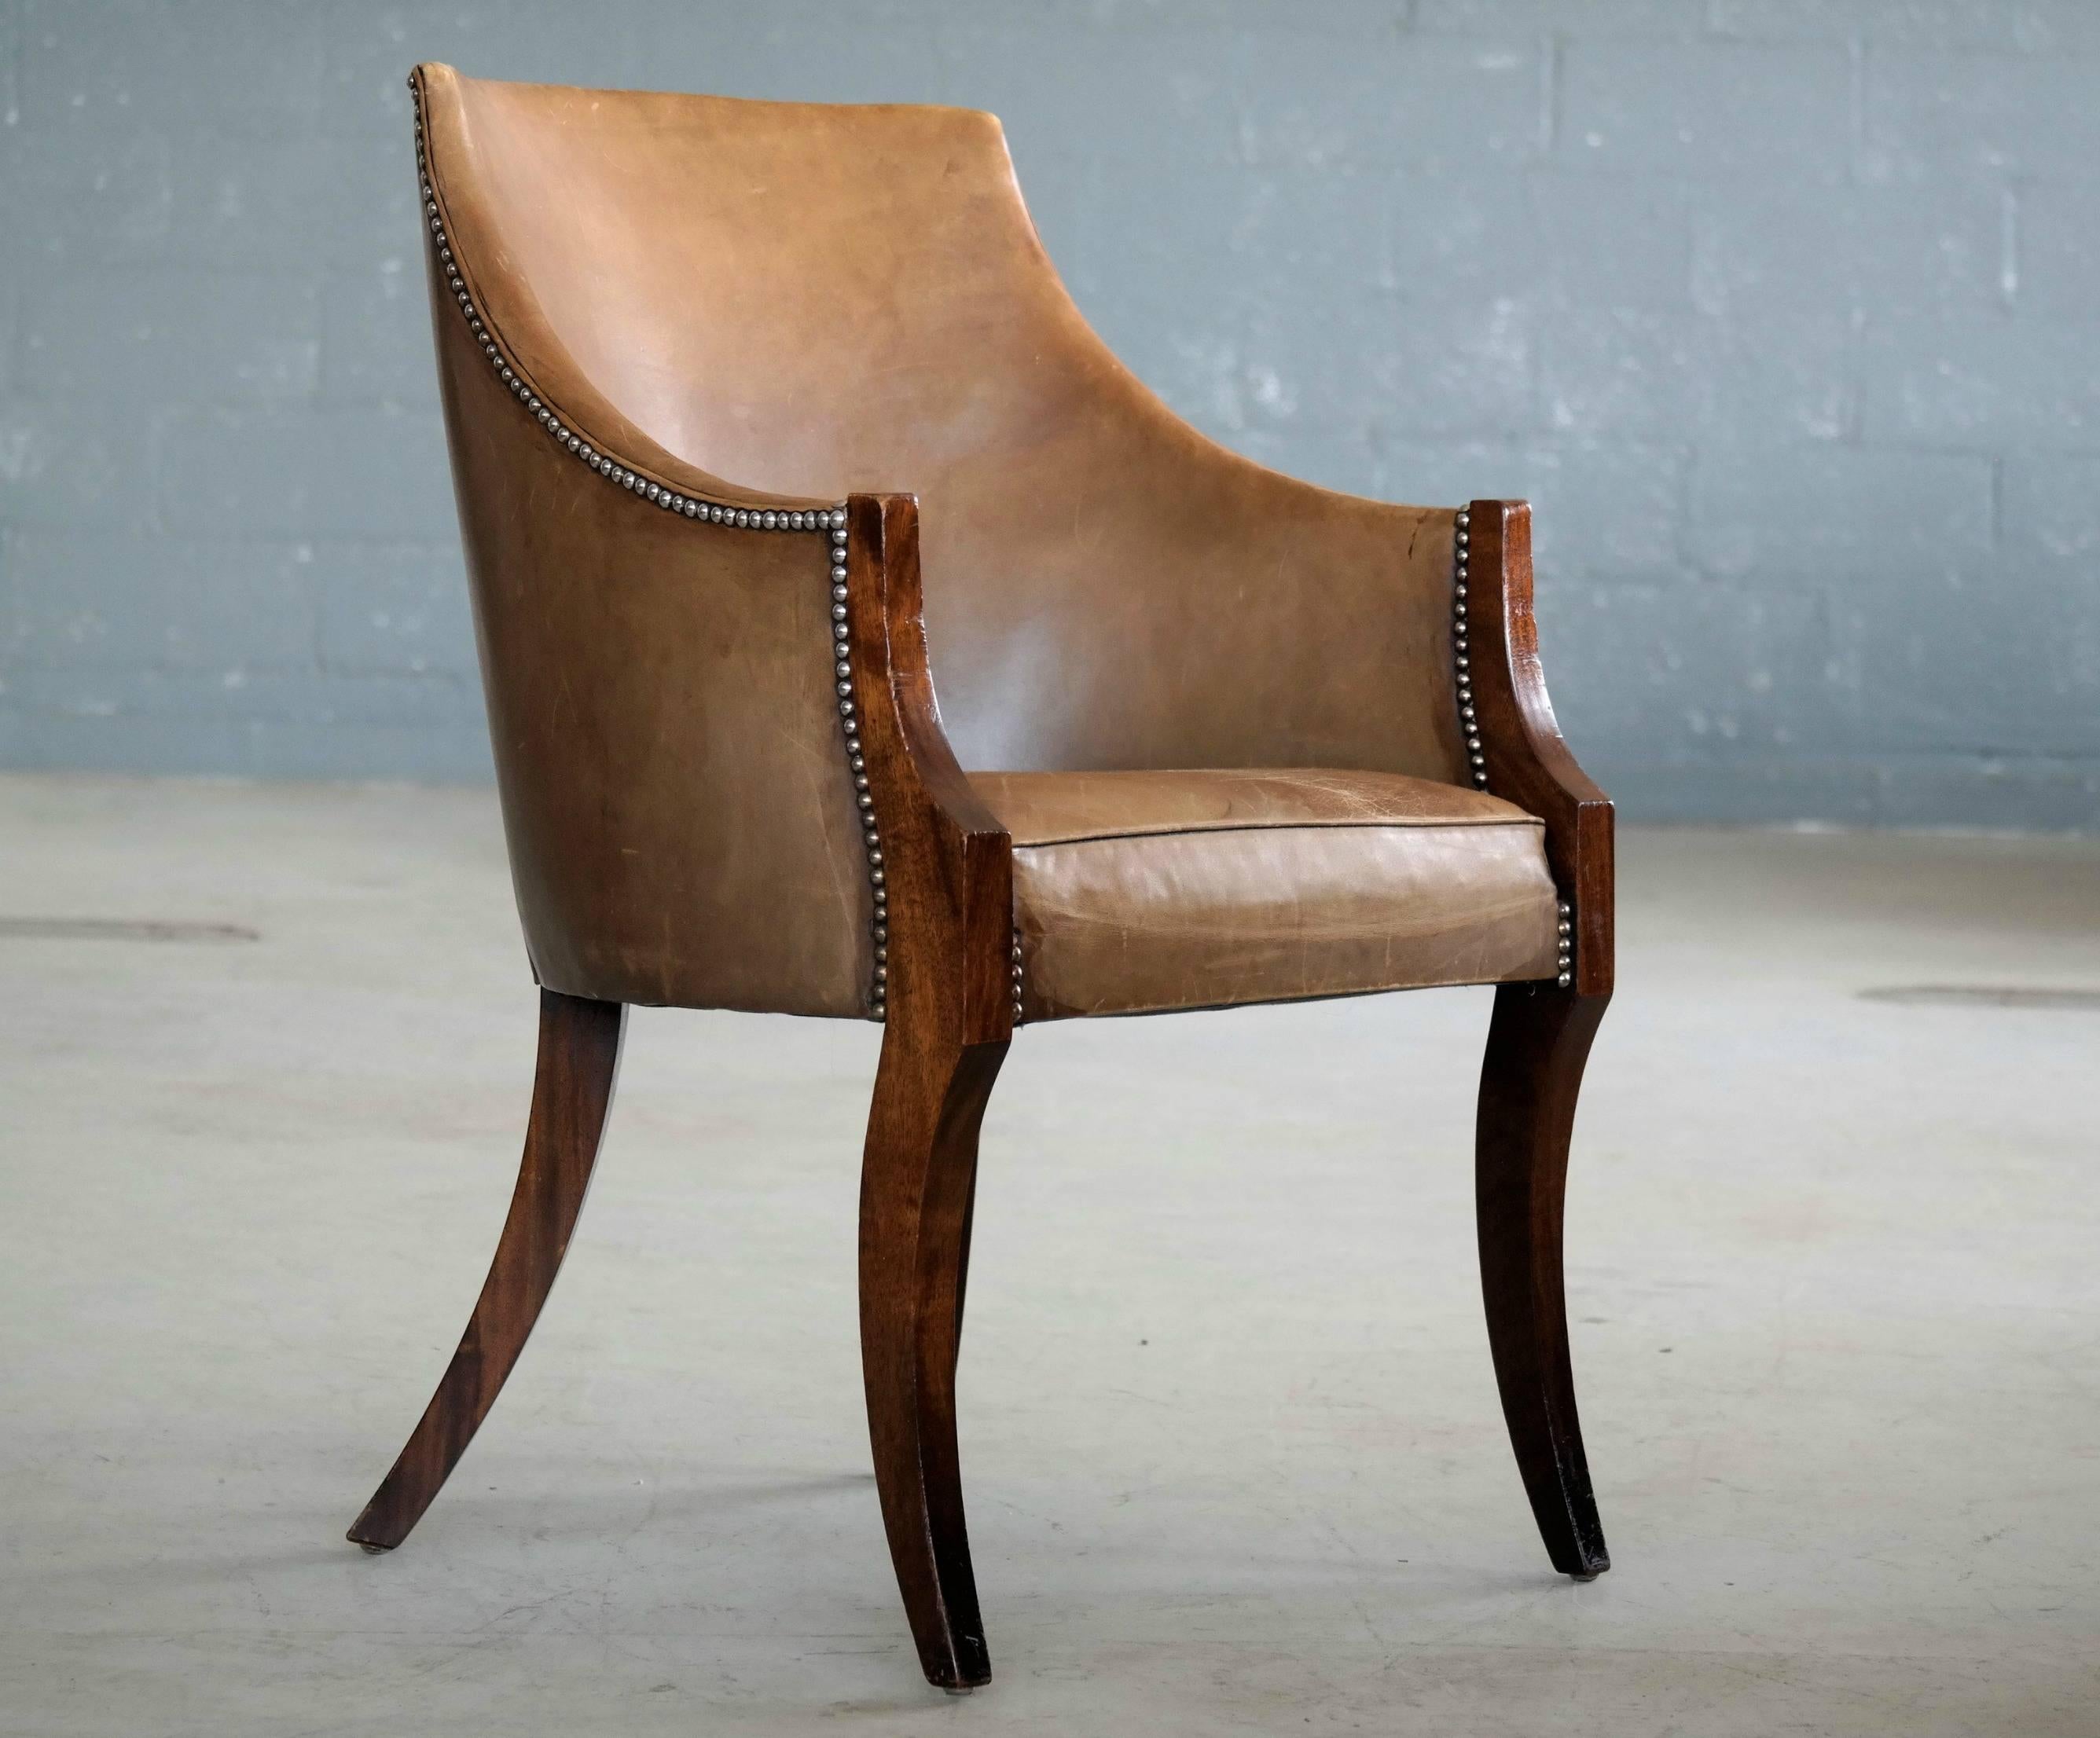 Elegant side chair by Master Furniture Maker, Frits Henningsen likely made in the 1930s. Crafted in fine cuts of Cuban mahogany with gracefully curved legs and fitted light brown leather upholstery. Appropriate age wear to the wood with some scuffs